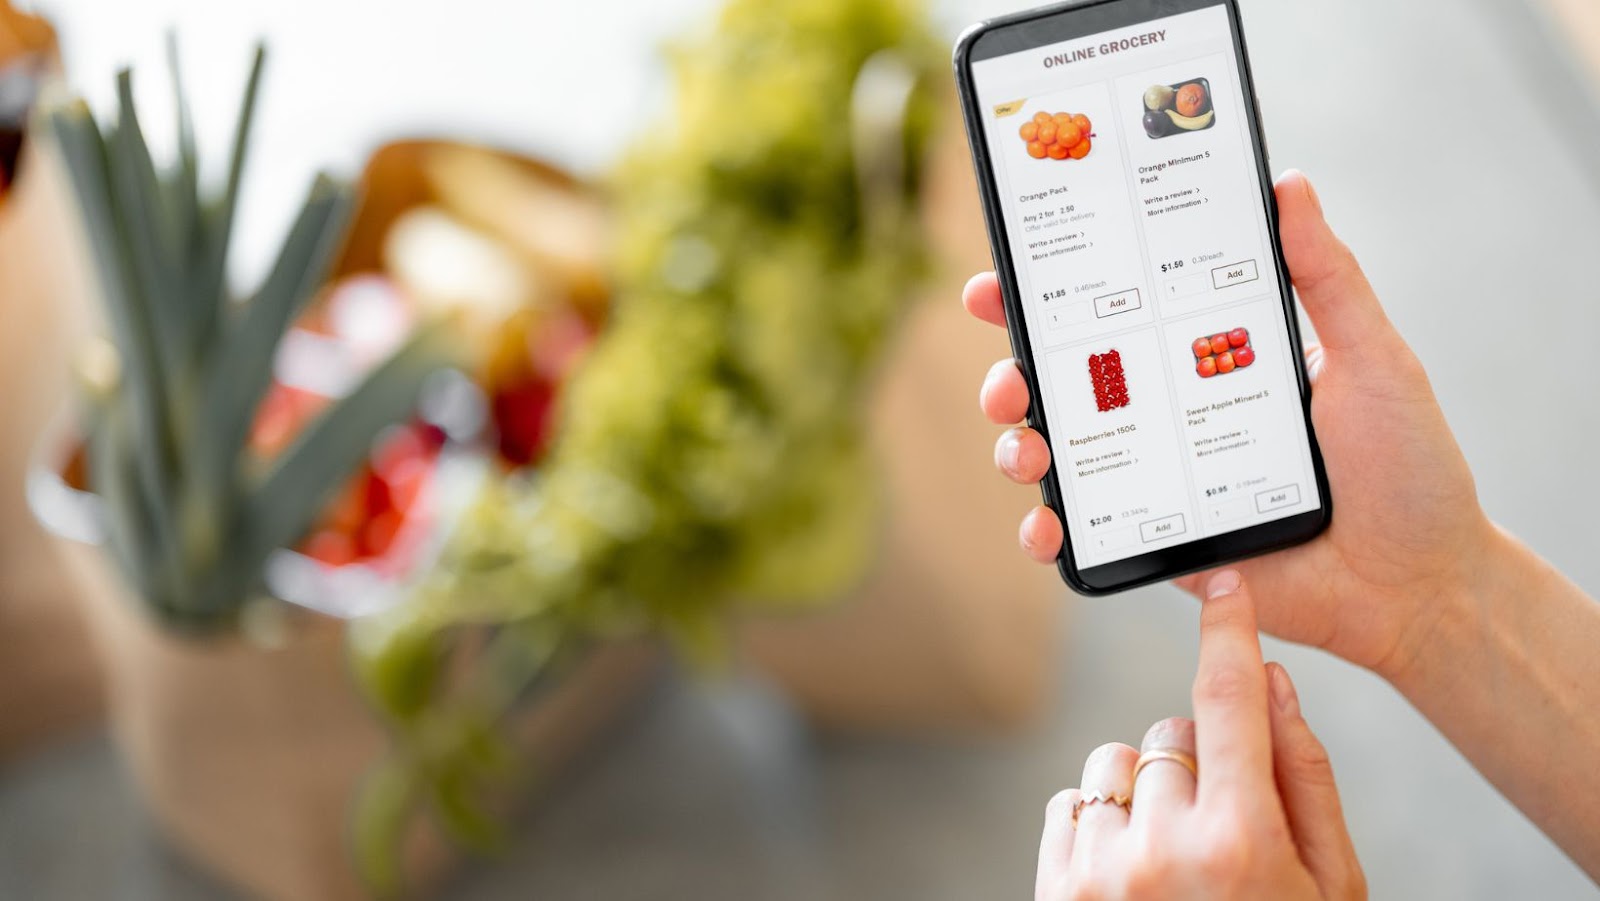 Why Flink is a game-changer for the grocery industry